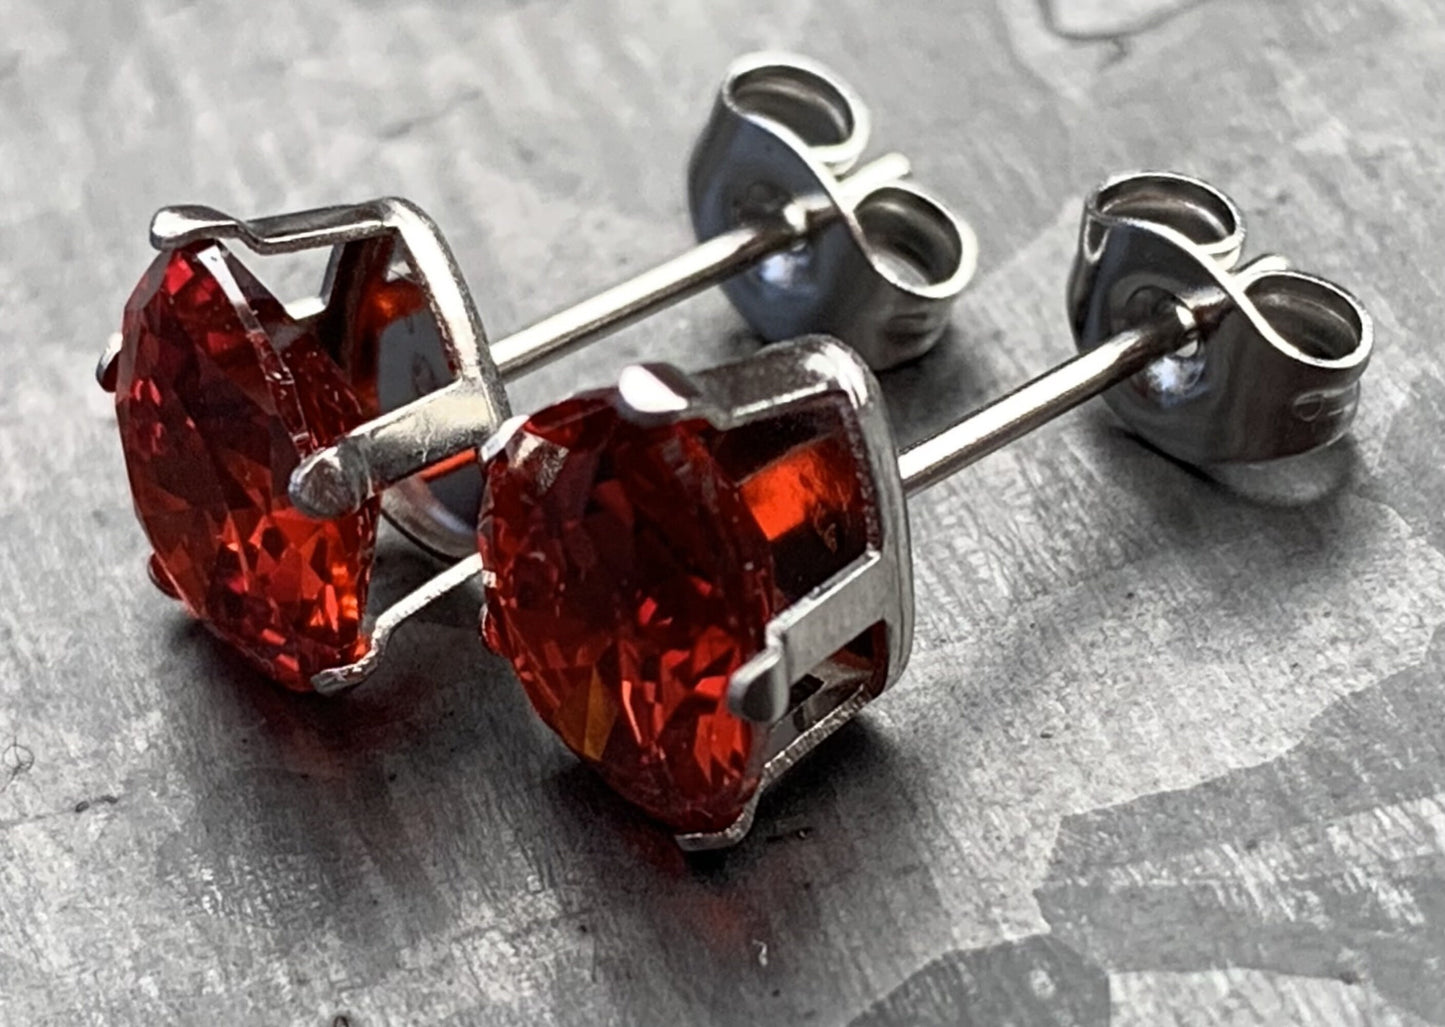 PAIR of Stunning Hypoallergenic Red CZ Gem Teardrop Stud Earrings - 3mm, 4mm, 5mm, 6mm & 7mm Gem Size Available!